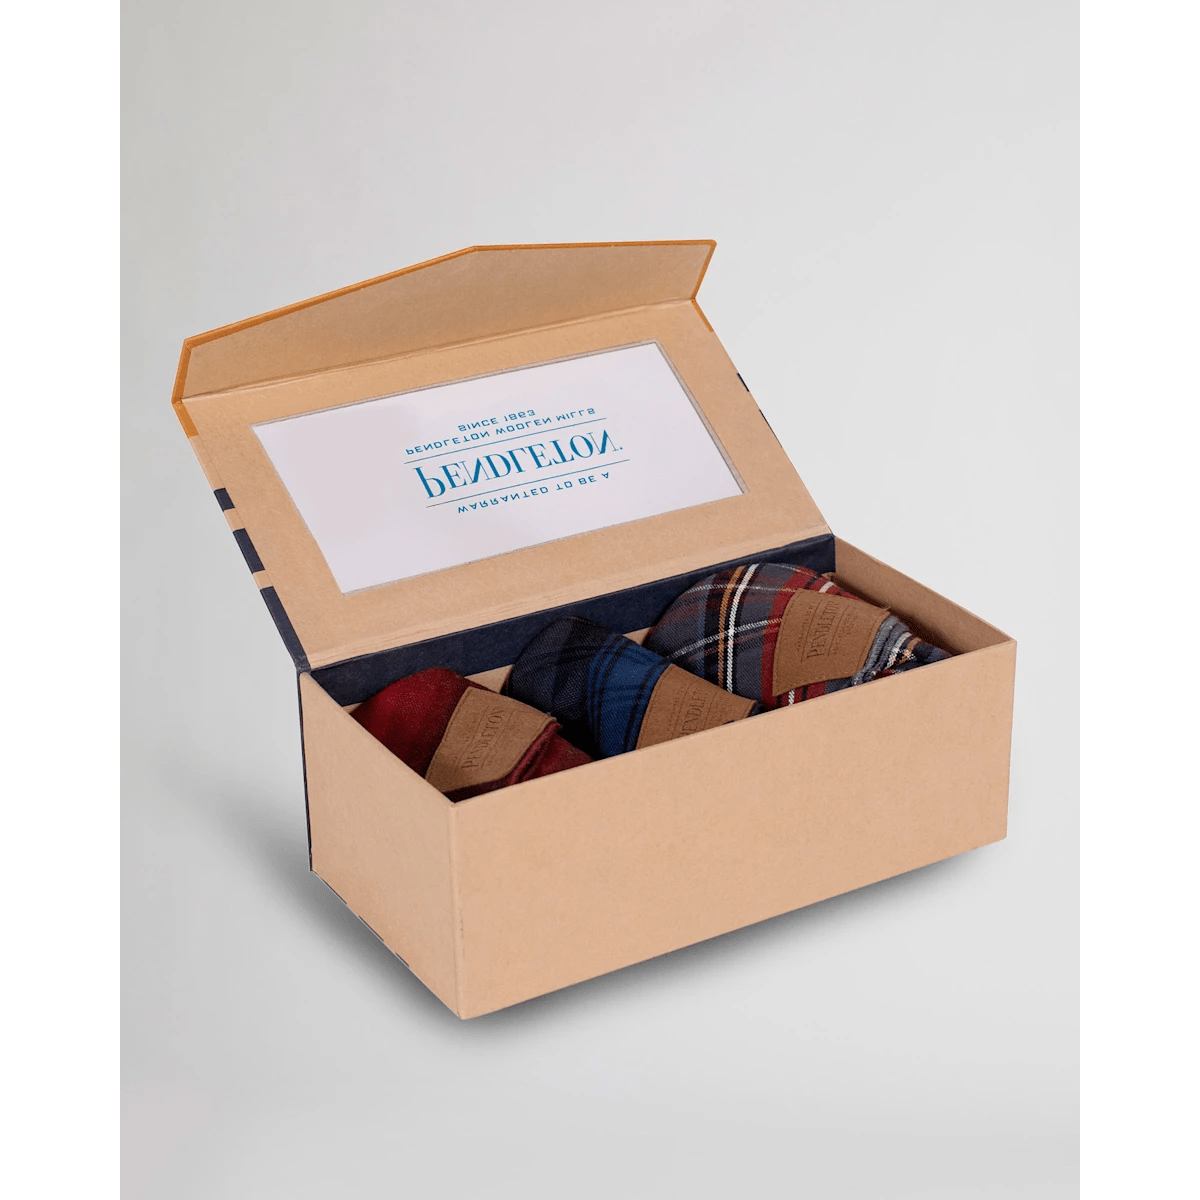 Get Our Custom Bandana Boxes for the Packaging of Glamorous Bandanas